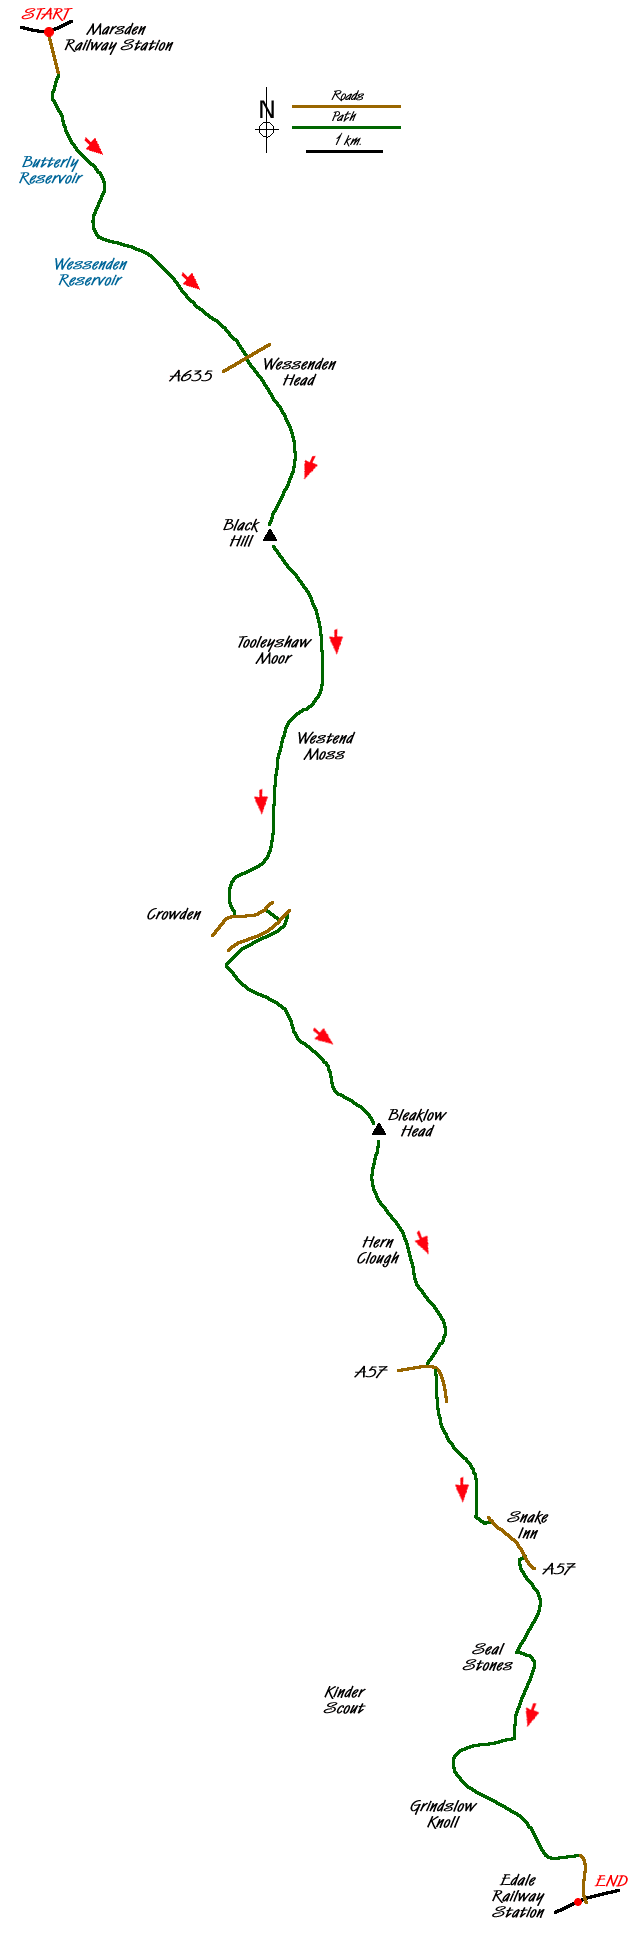 Route Map - Marsden to Edale challenge Walk